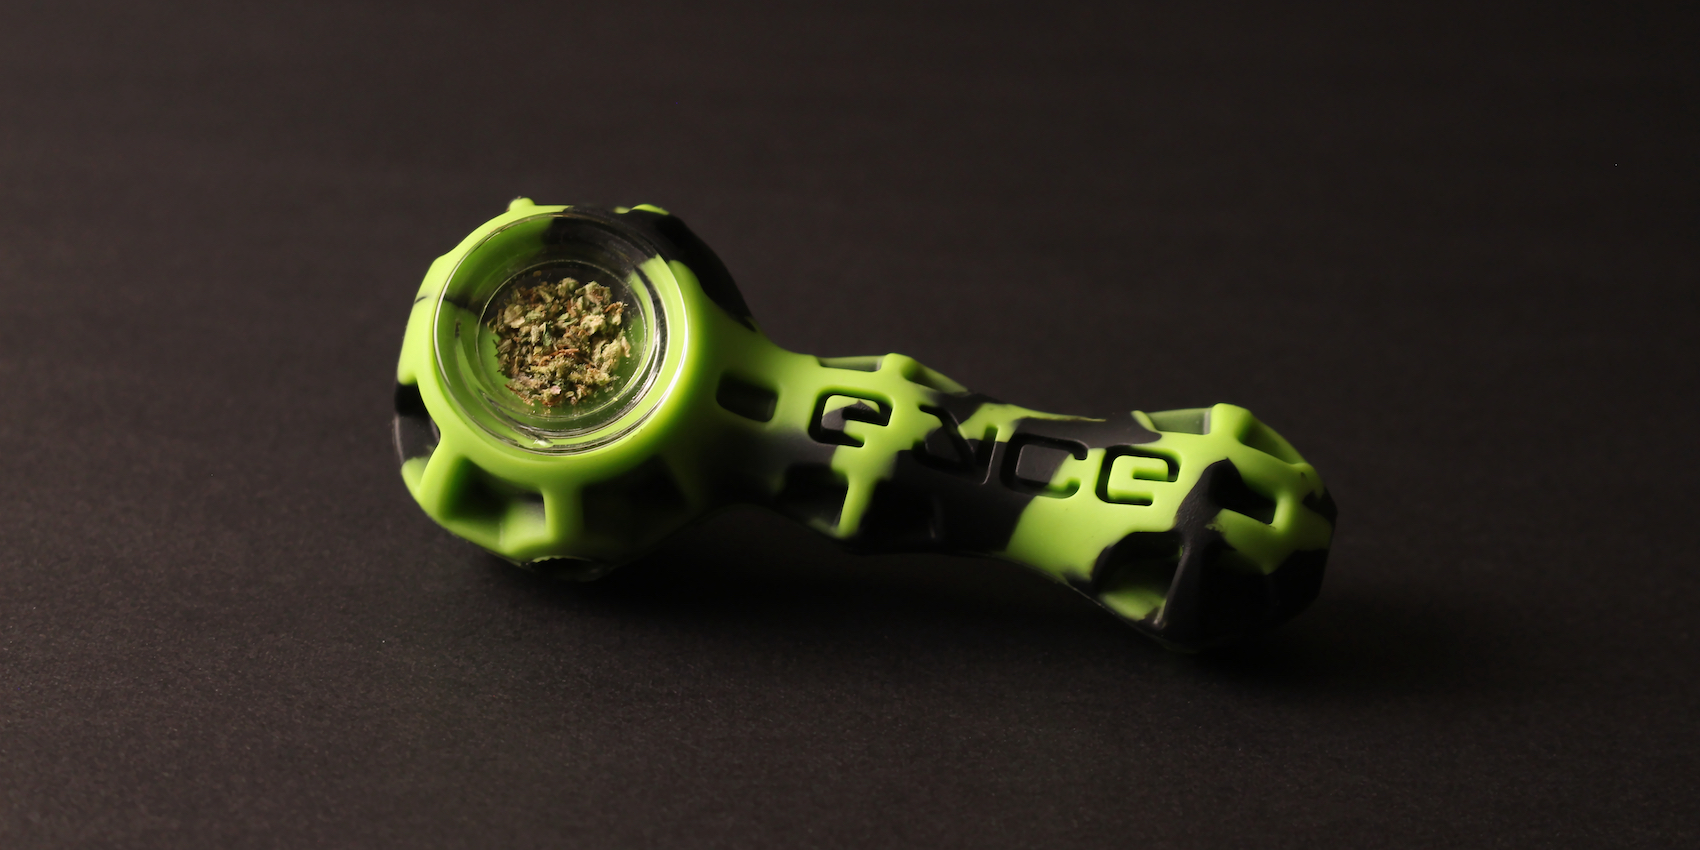 Eyce Spoon silicone weed smoking pipe